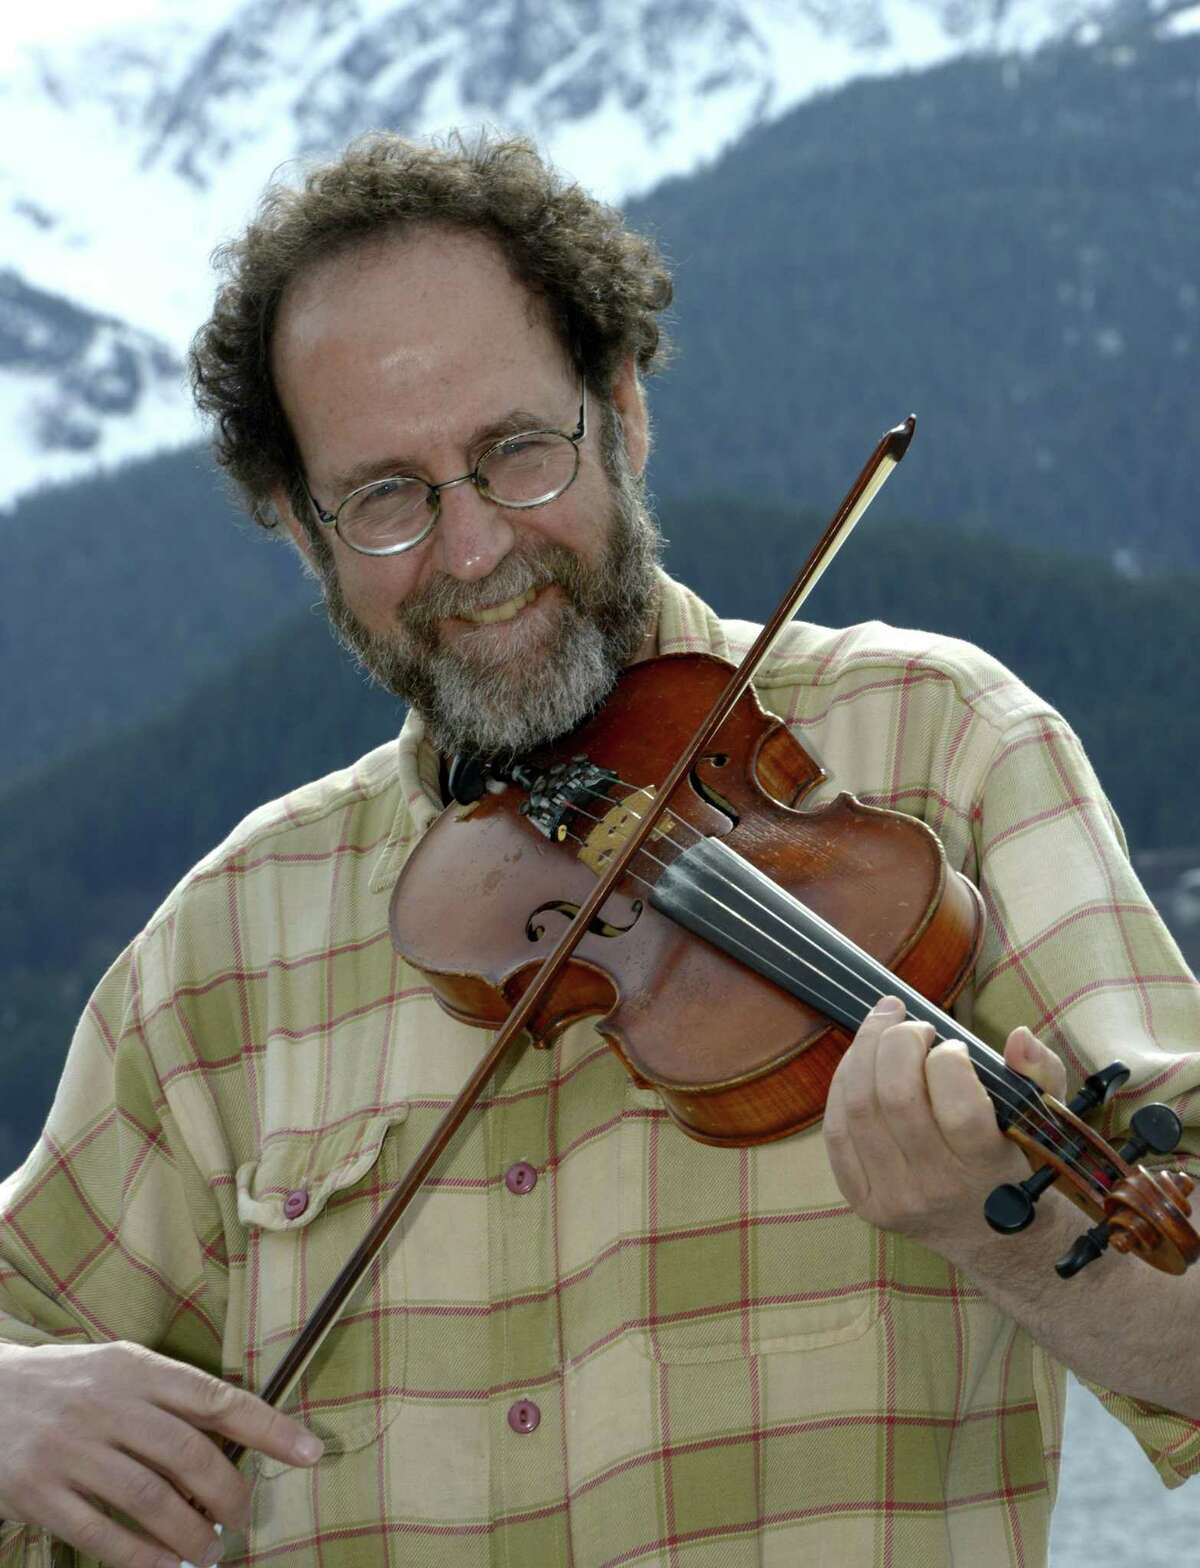 PAIR OF CONCERTS: Alaska’s fiddling poet Ken Waldman returns with his show to The Buttonwood Tree, 605 Main St. in Middletown, for the first time in over a decade Sunday, June 9, at 6:30 p.m. Tickets are $15; www.buttonwood.org or 860-347-4957. Then, on Tuesday, June 11, Waldman brings Binghamton musicians, Brian Vollmer and Claire Byrne to join him for two shows in New Haven at The International Festival of Arts & Ideas at 1:15 p.m. on the Green.